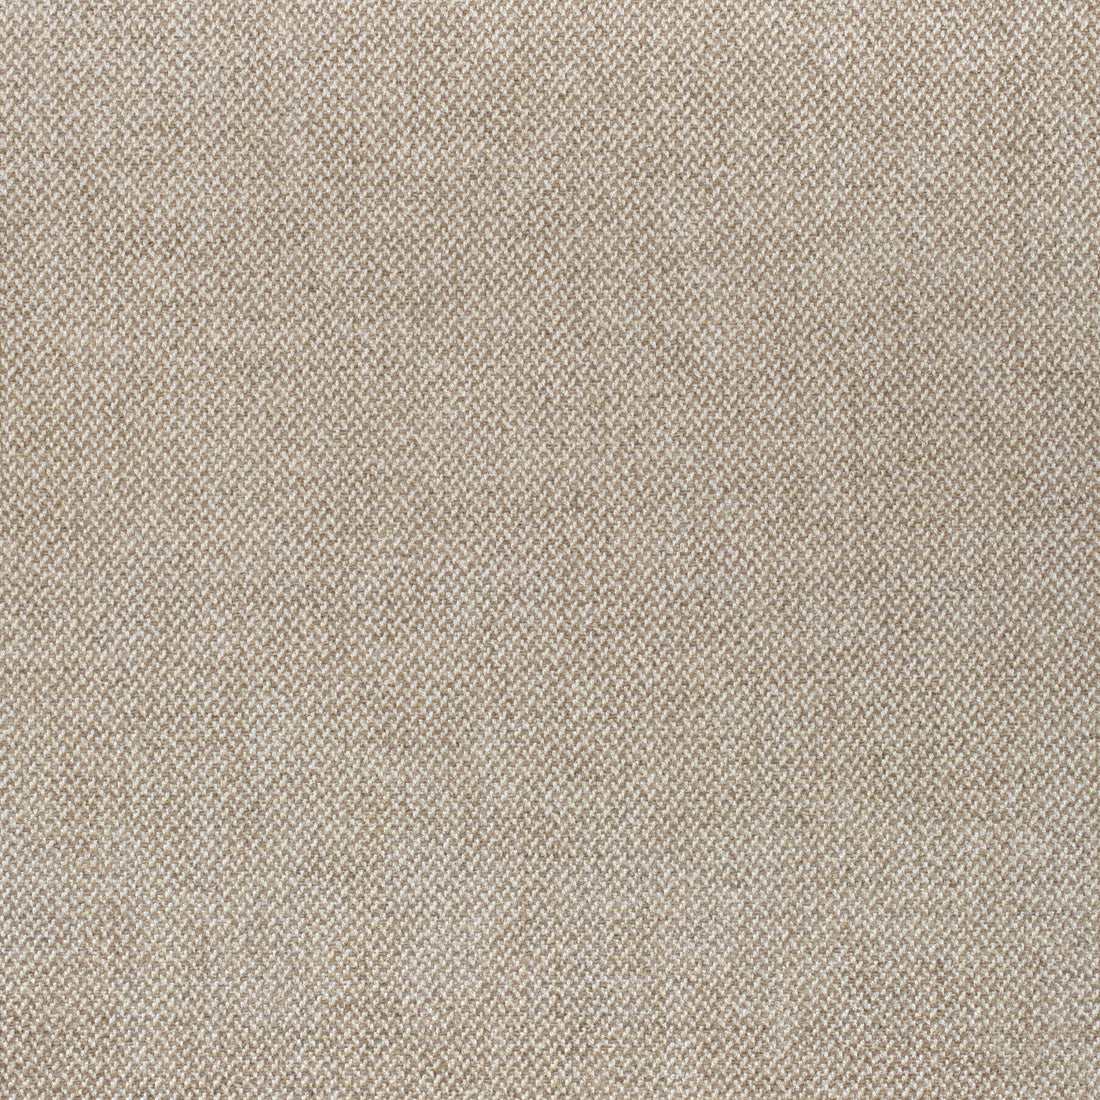 Picco fabric in sand color - pattern number W80703 - by Thibaut in the Woven Resource 11: Rialto collection